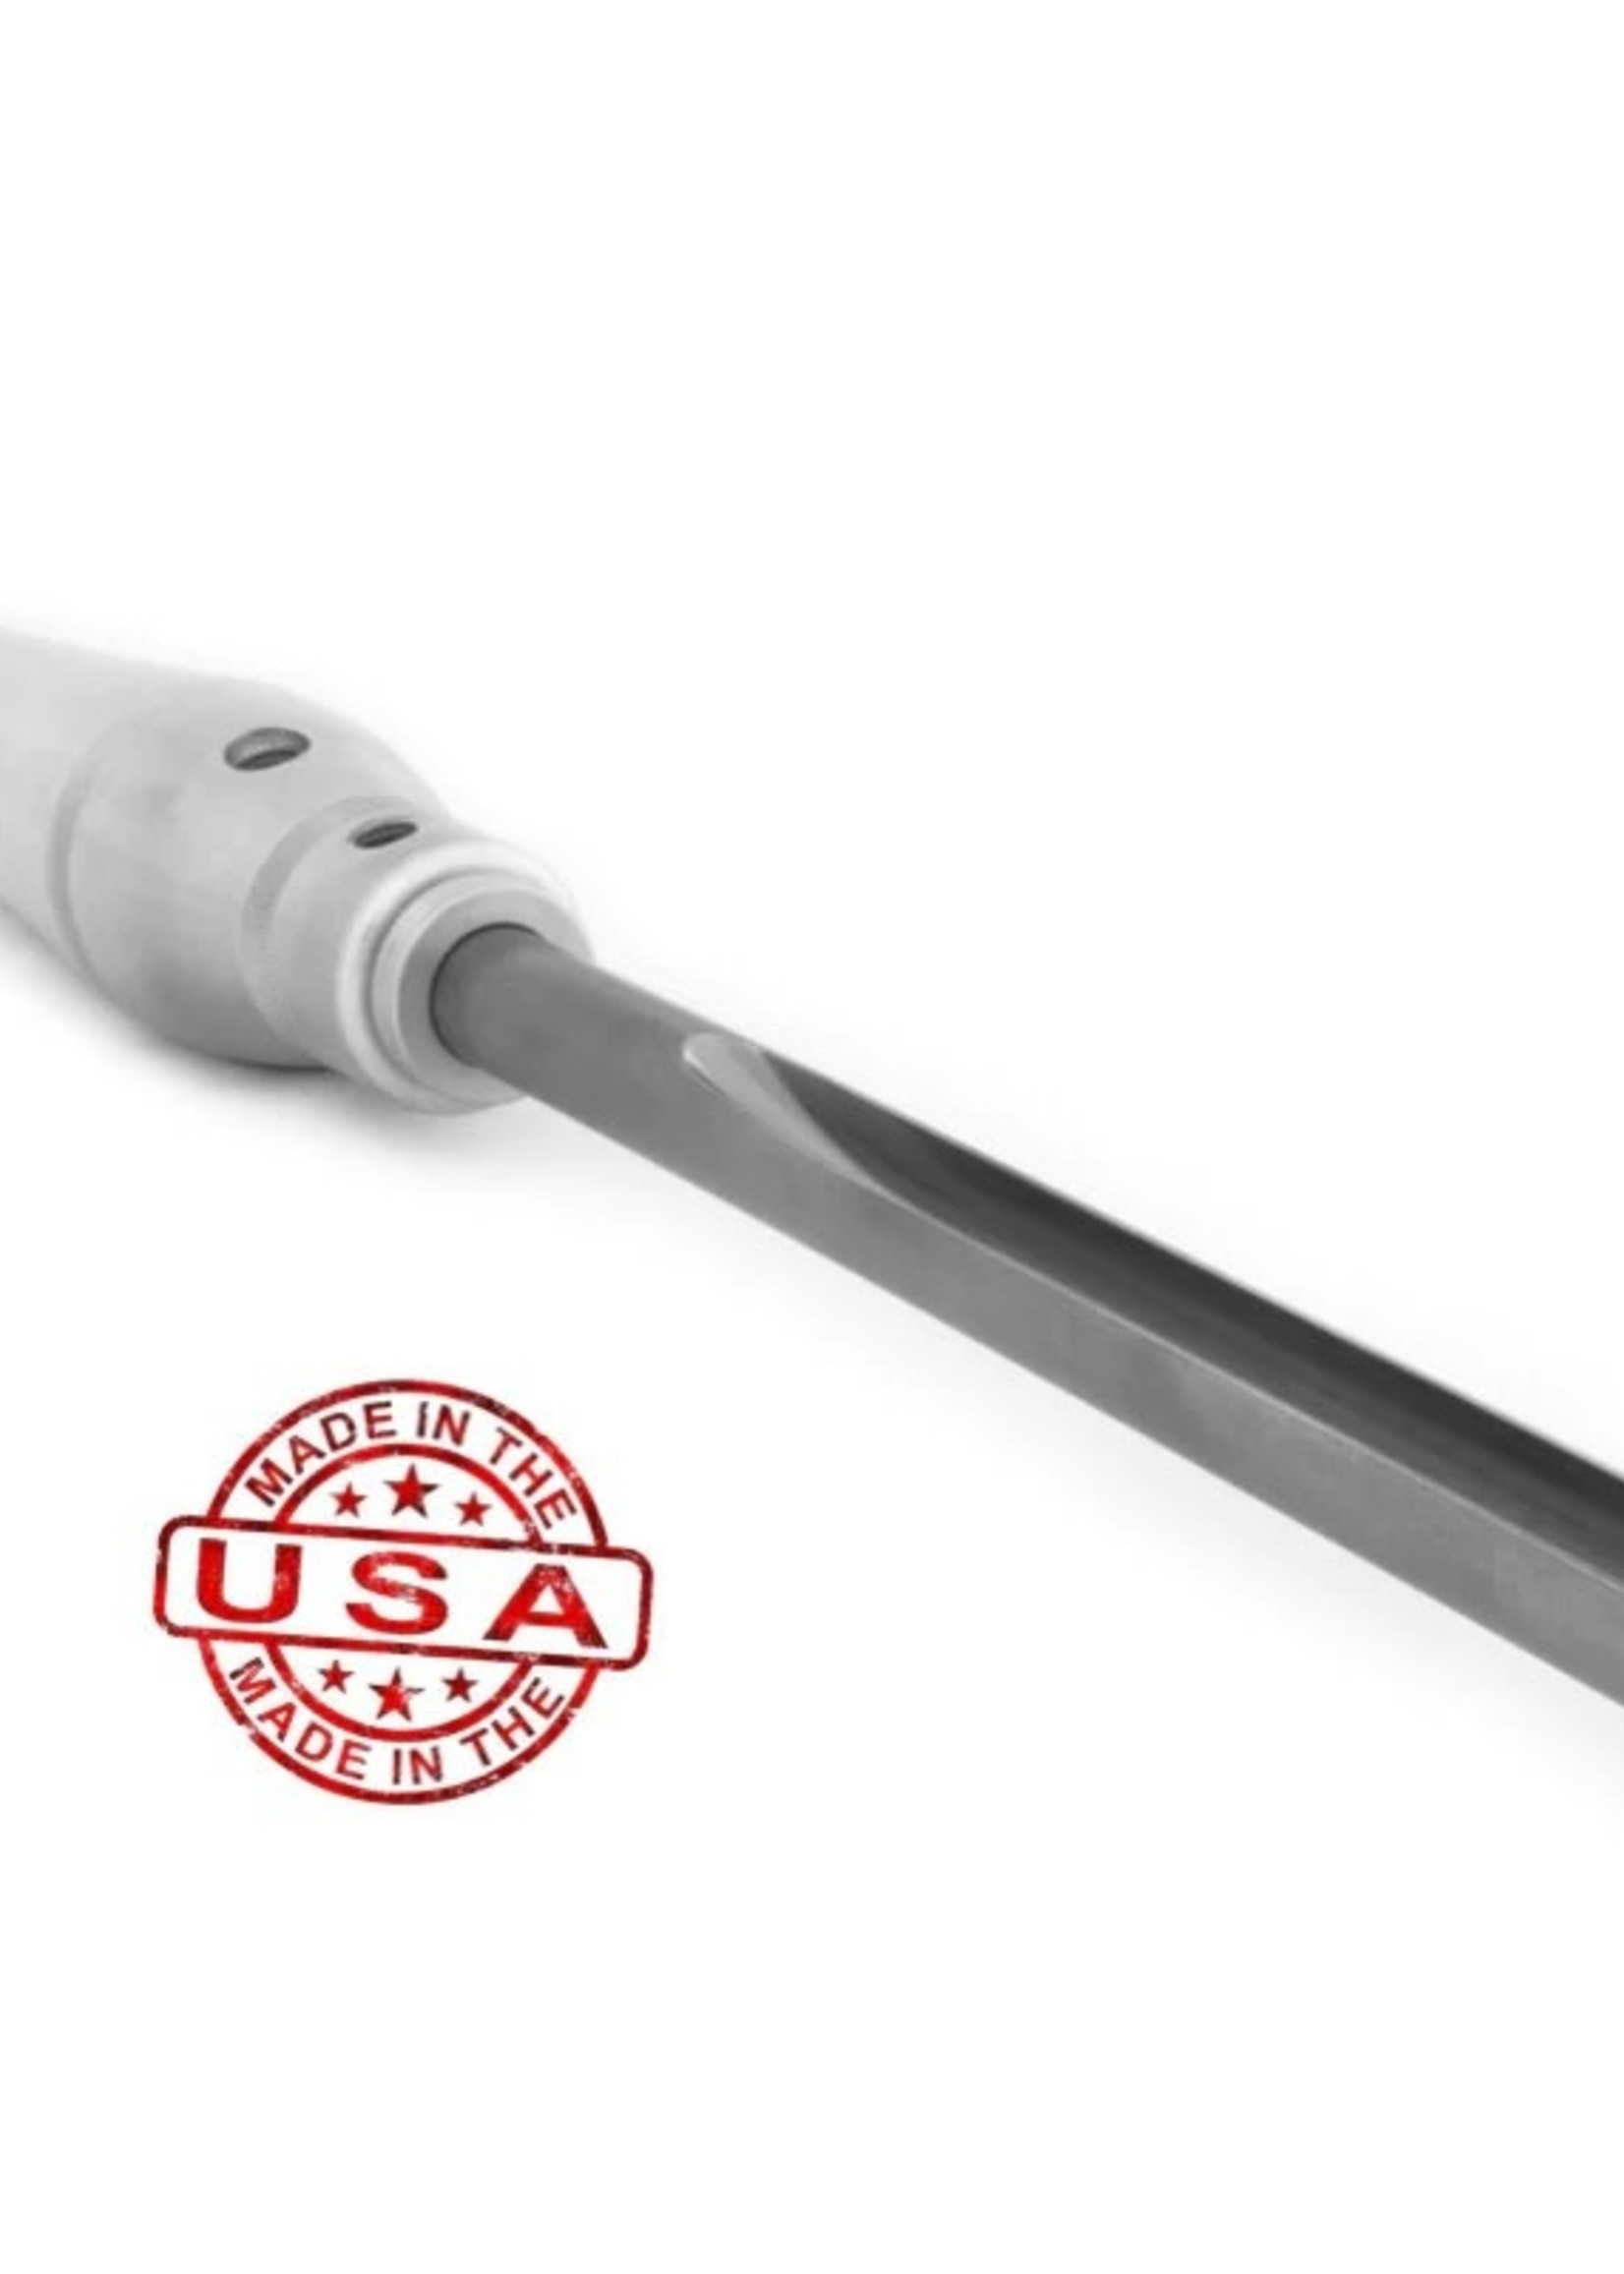 Carter and Son Toolworks UBG58-16 5/8" u-shaped bowl gouge with 16" aluminum handle.